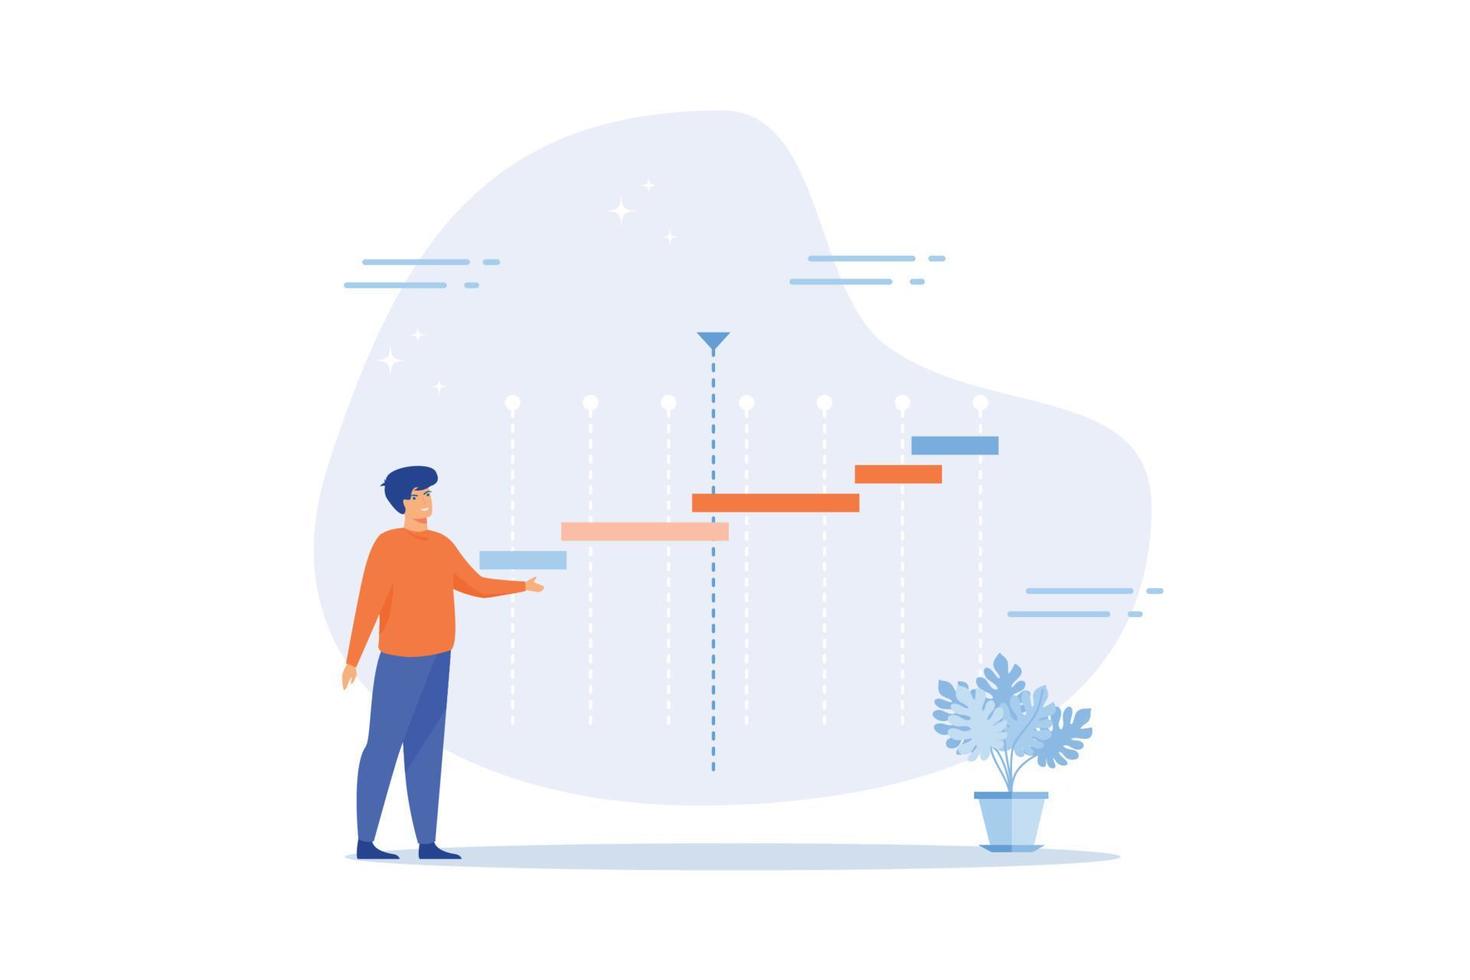 Project timeline or schedule, planning for resource on working tasks, development plan, deadline to launch product, workflow concept, flat vector modern illustration